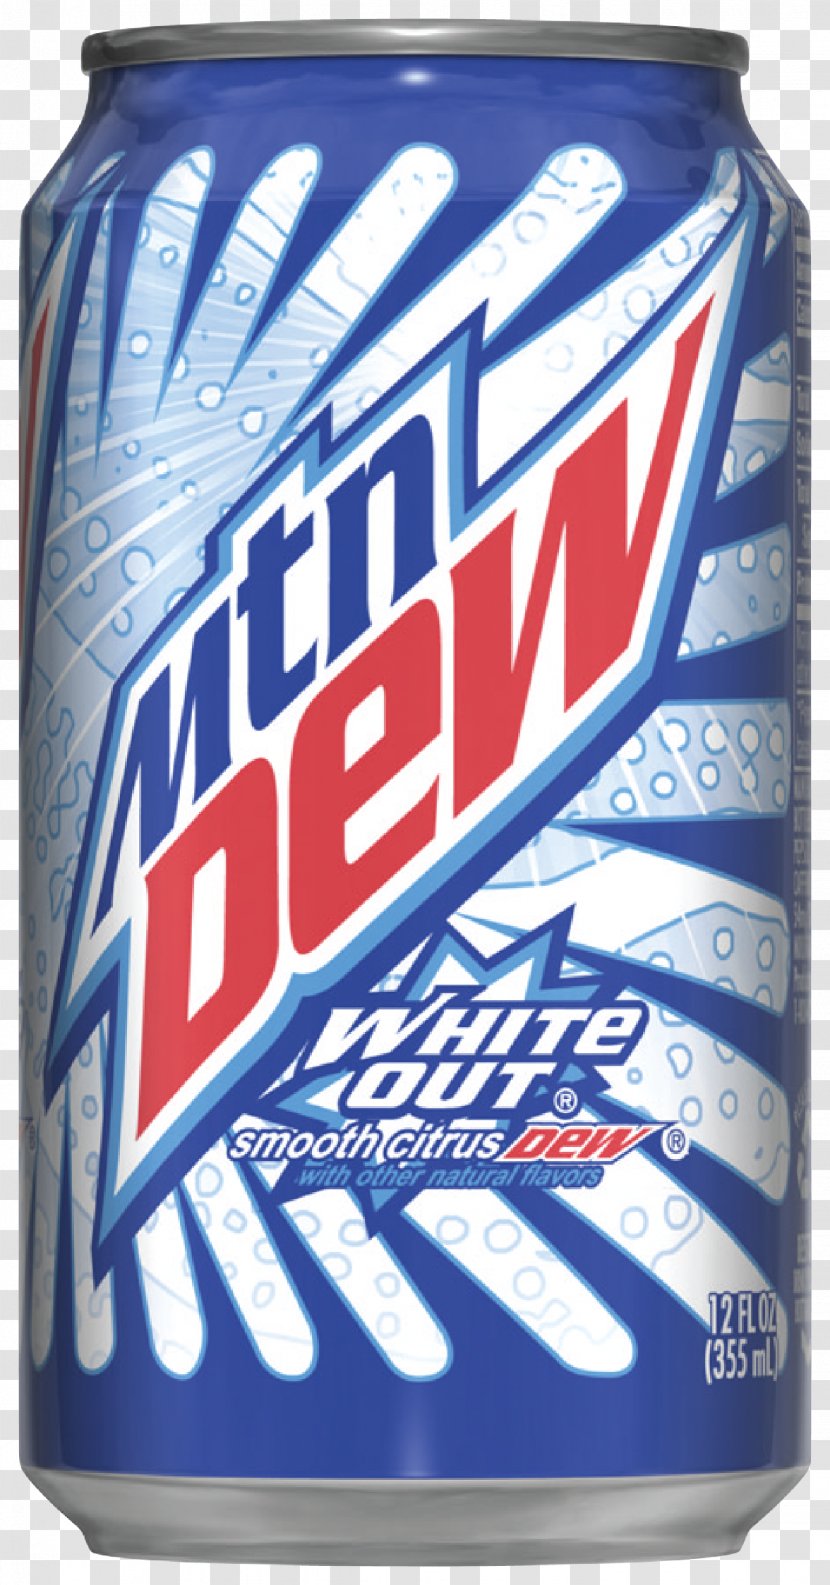 Fizzy Drinks Mountain Dew White Out 12oz. Cans Pack Of 12 Drink Can Flavor Transparent PNG